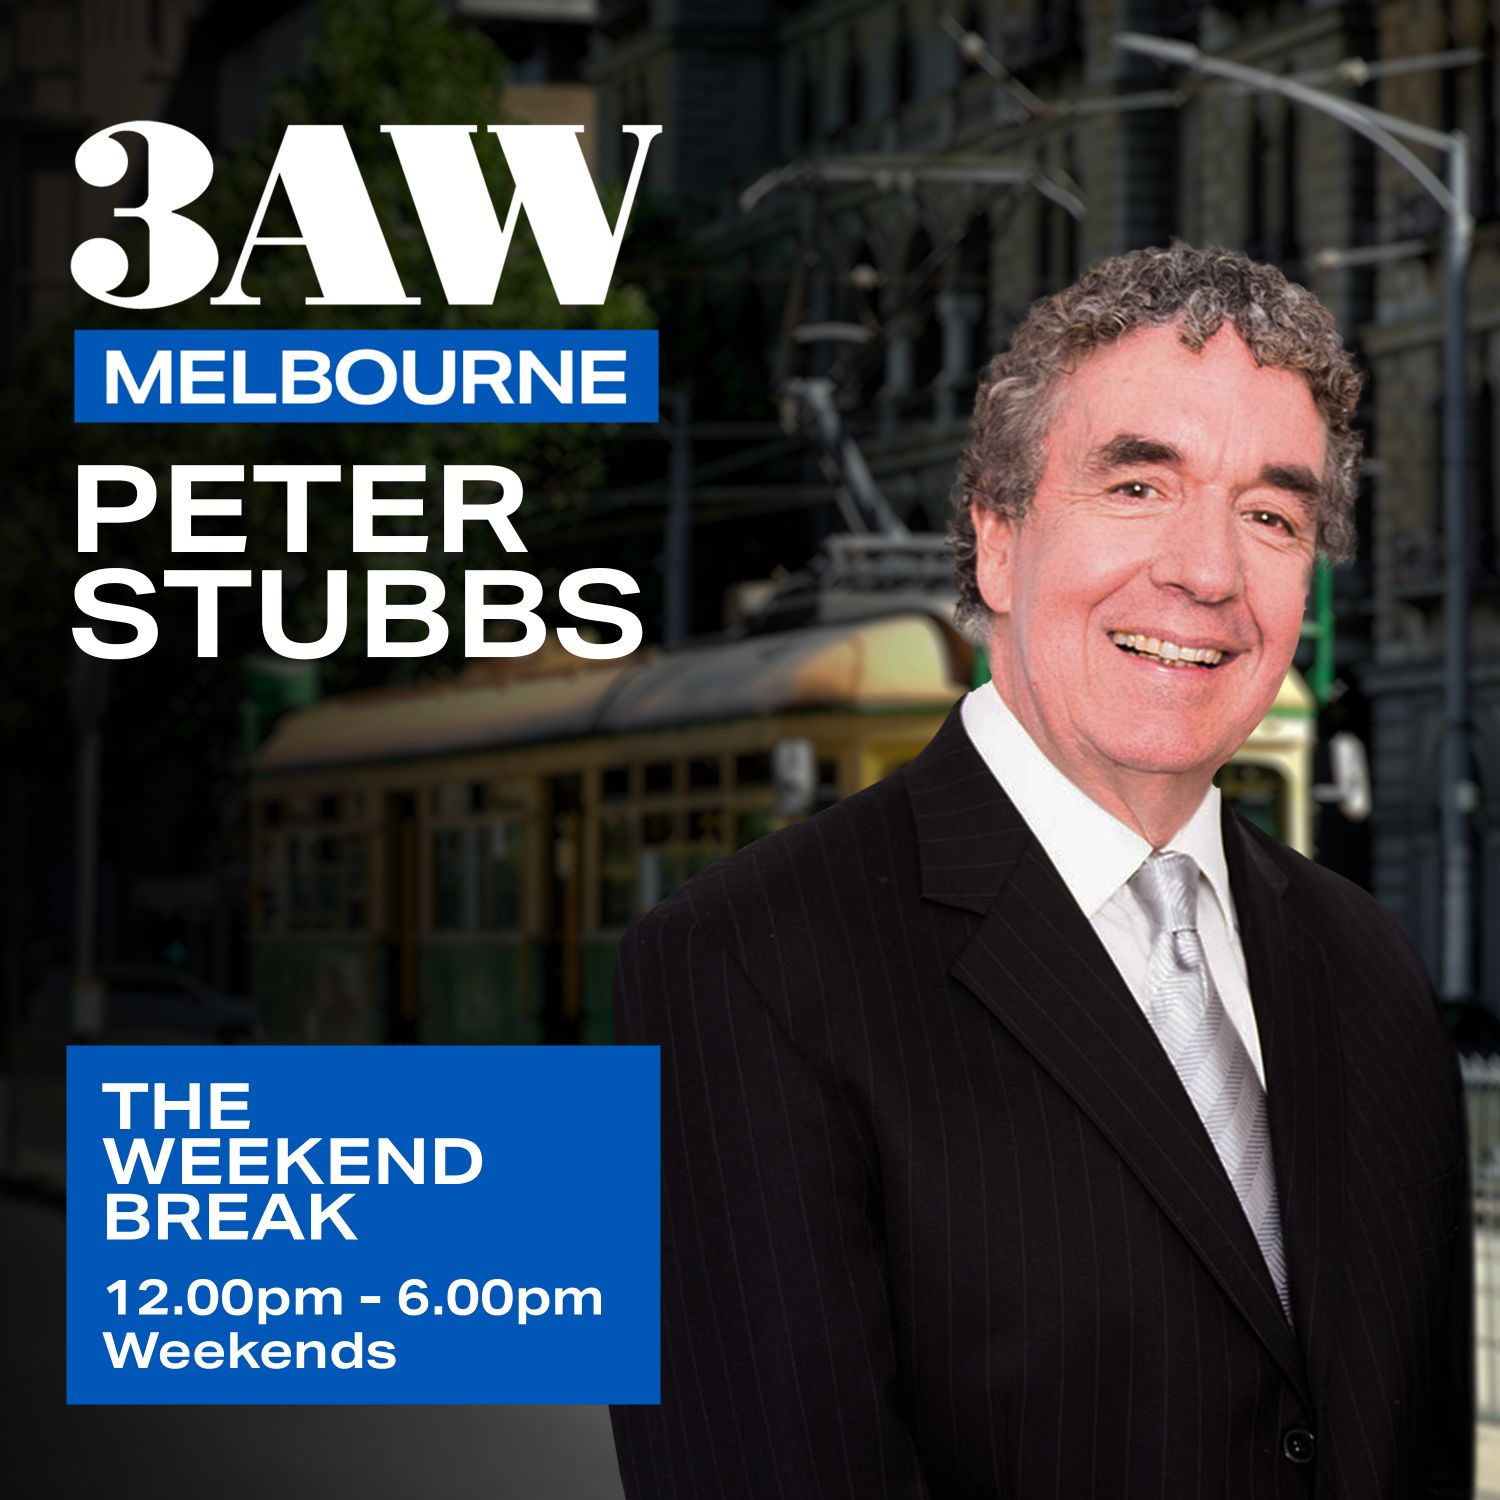 The Weekend Break with Peter "Grubby" Stubbs - Saturday 22nd of October 2022